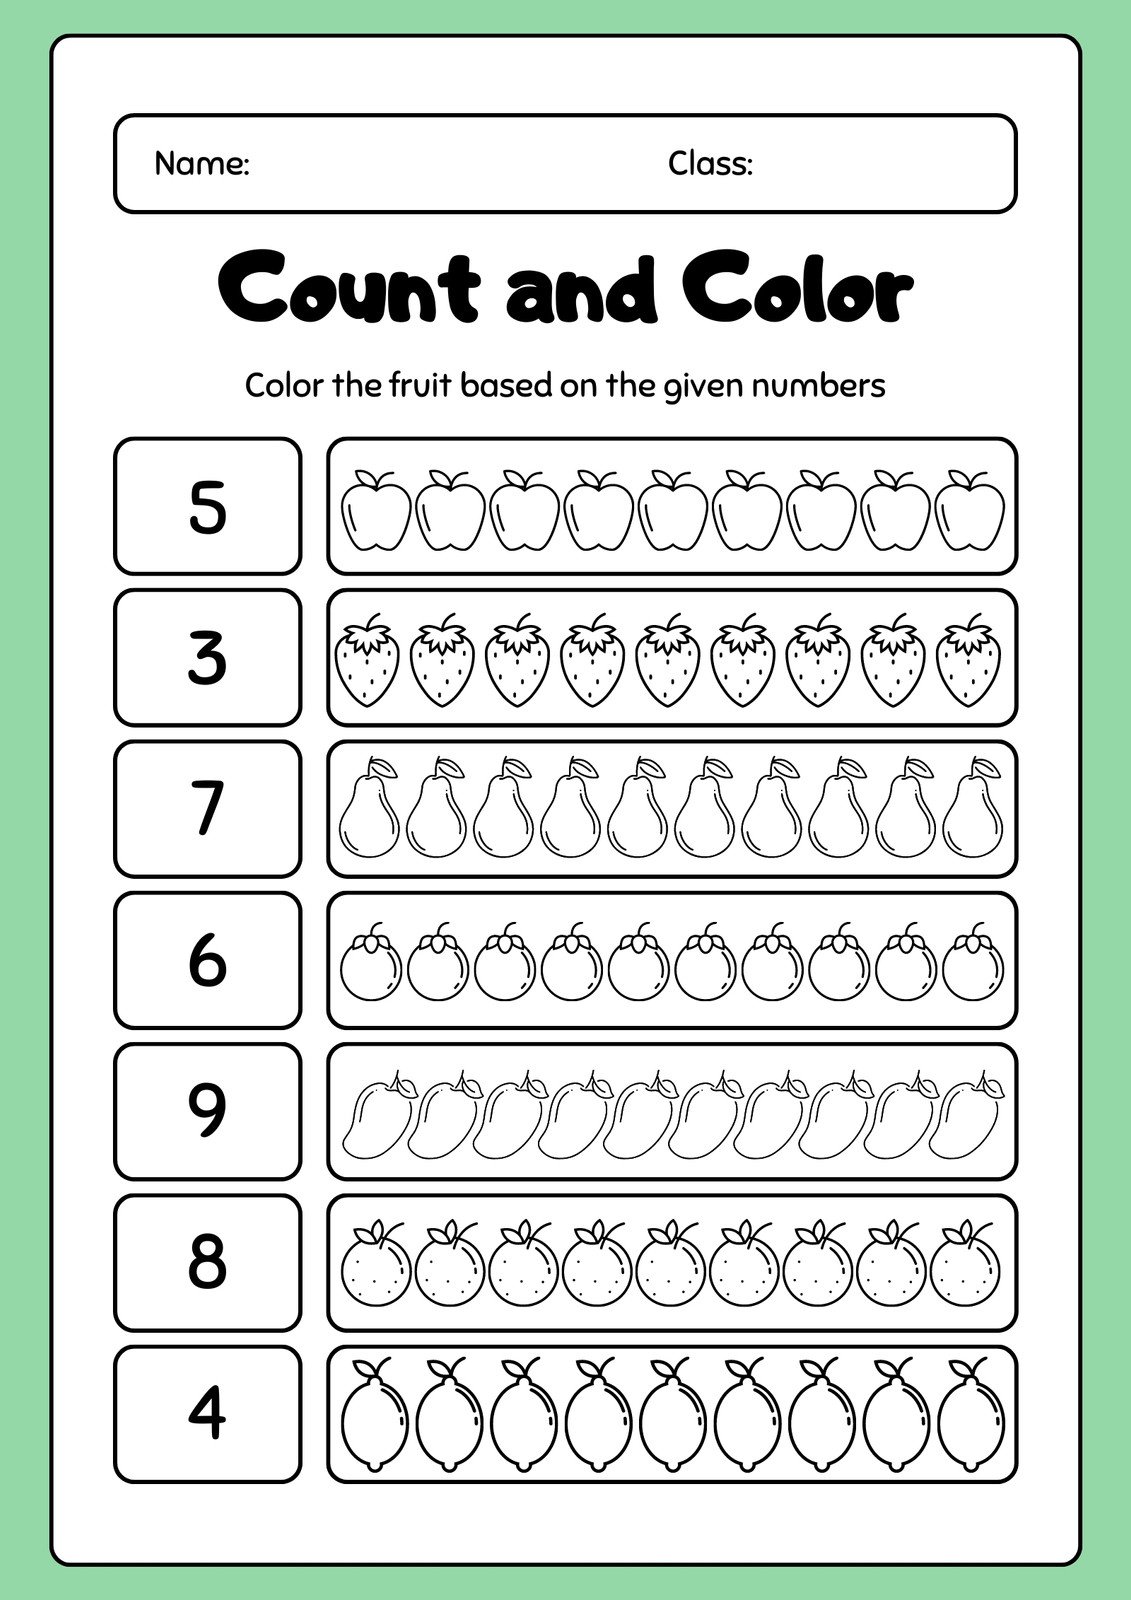 https://marketplace.canva.com/EAFjXoQlnDQ/1/0/1131w/canva-green-simple-fruit-illustrated-mathematics-count-and-color-worksheet-cVWeAsi_y_M.jpg